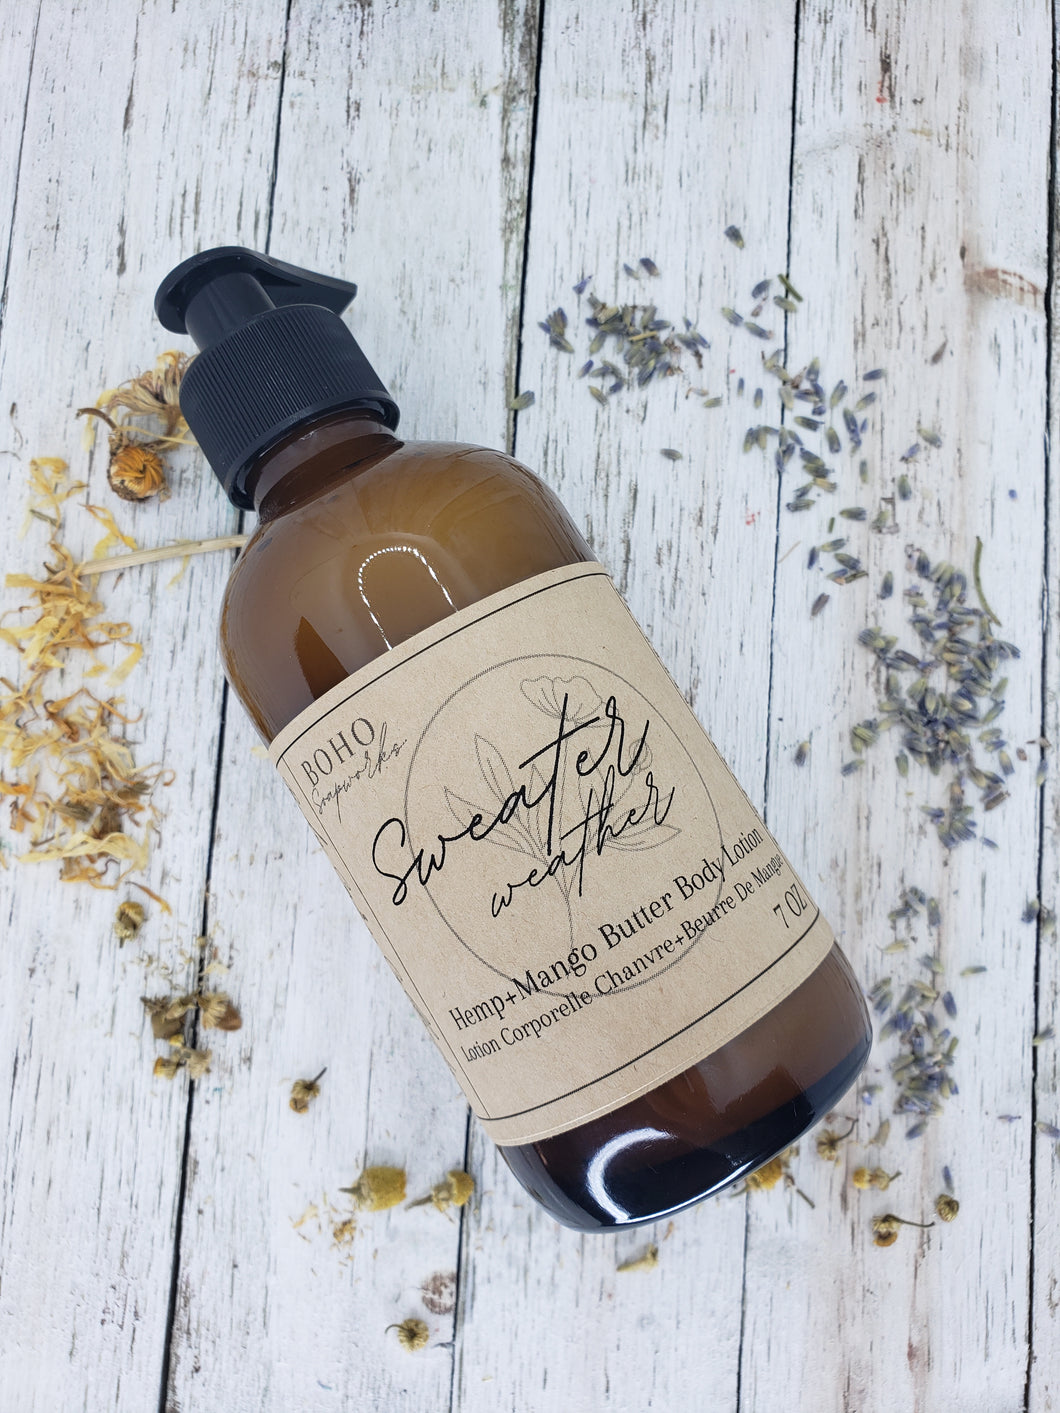 Sweater Weather Body Lotion